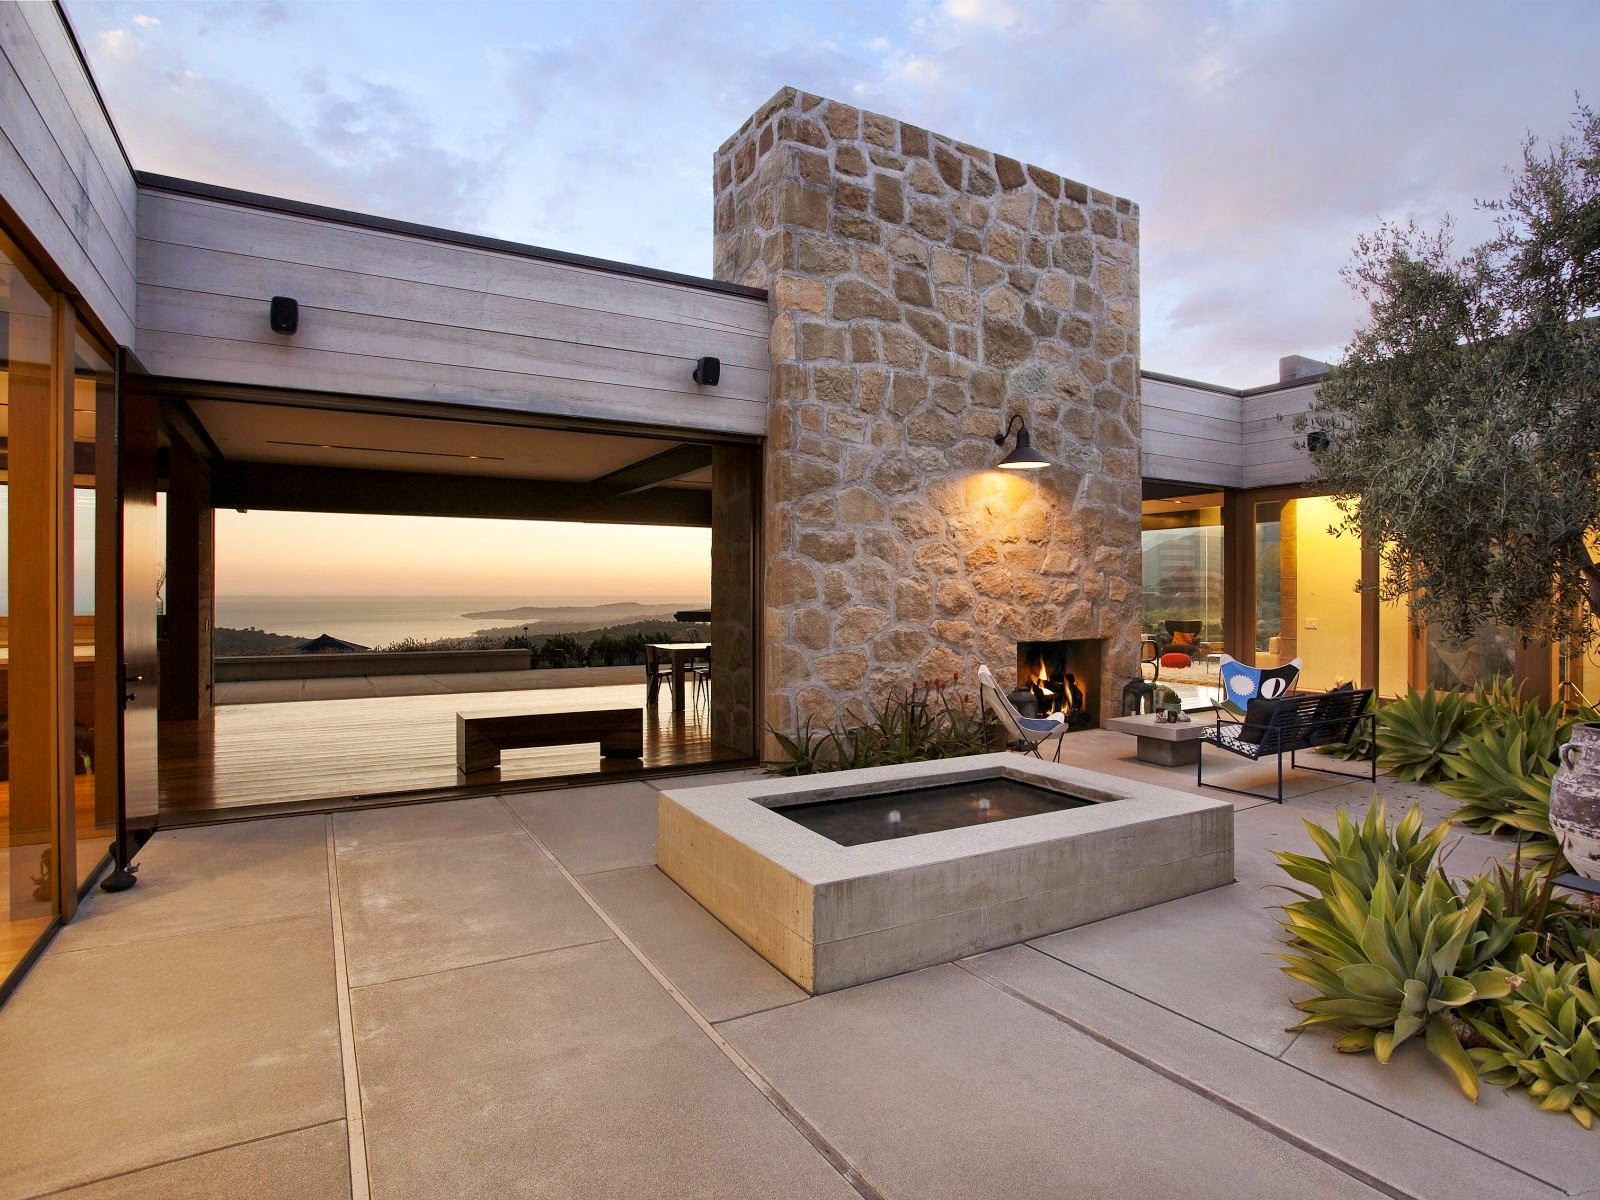 Backyard of a modern home with a fire pit